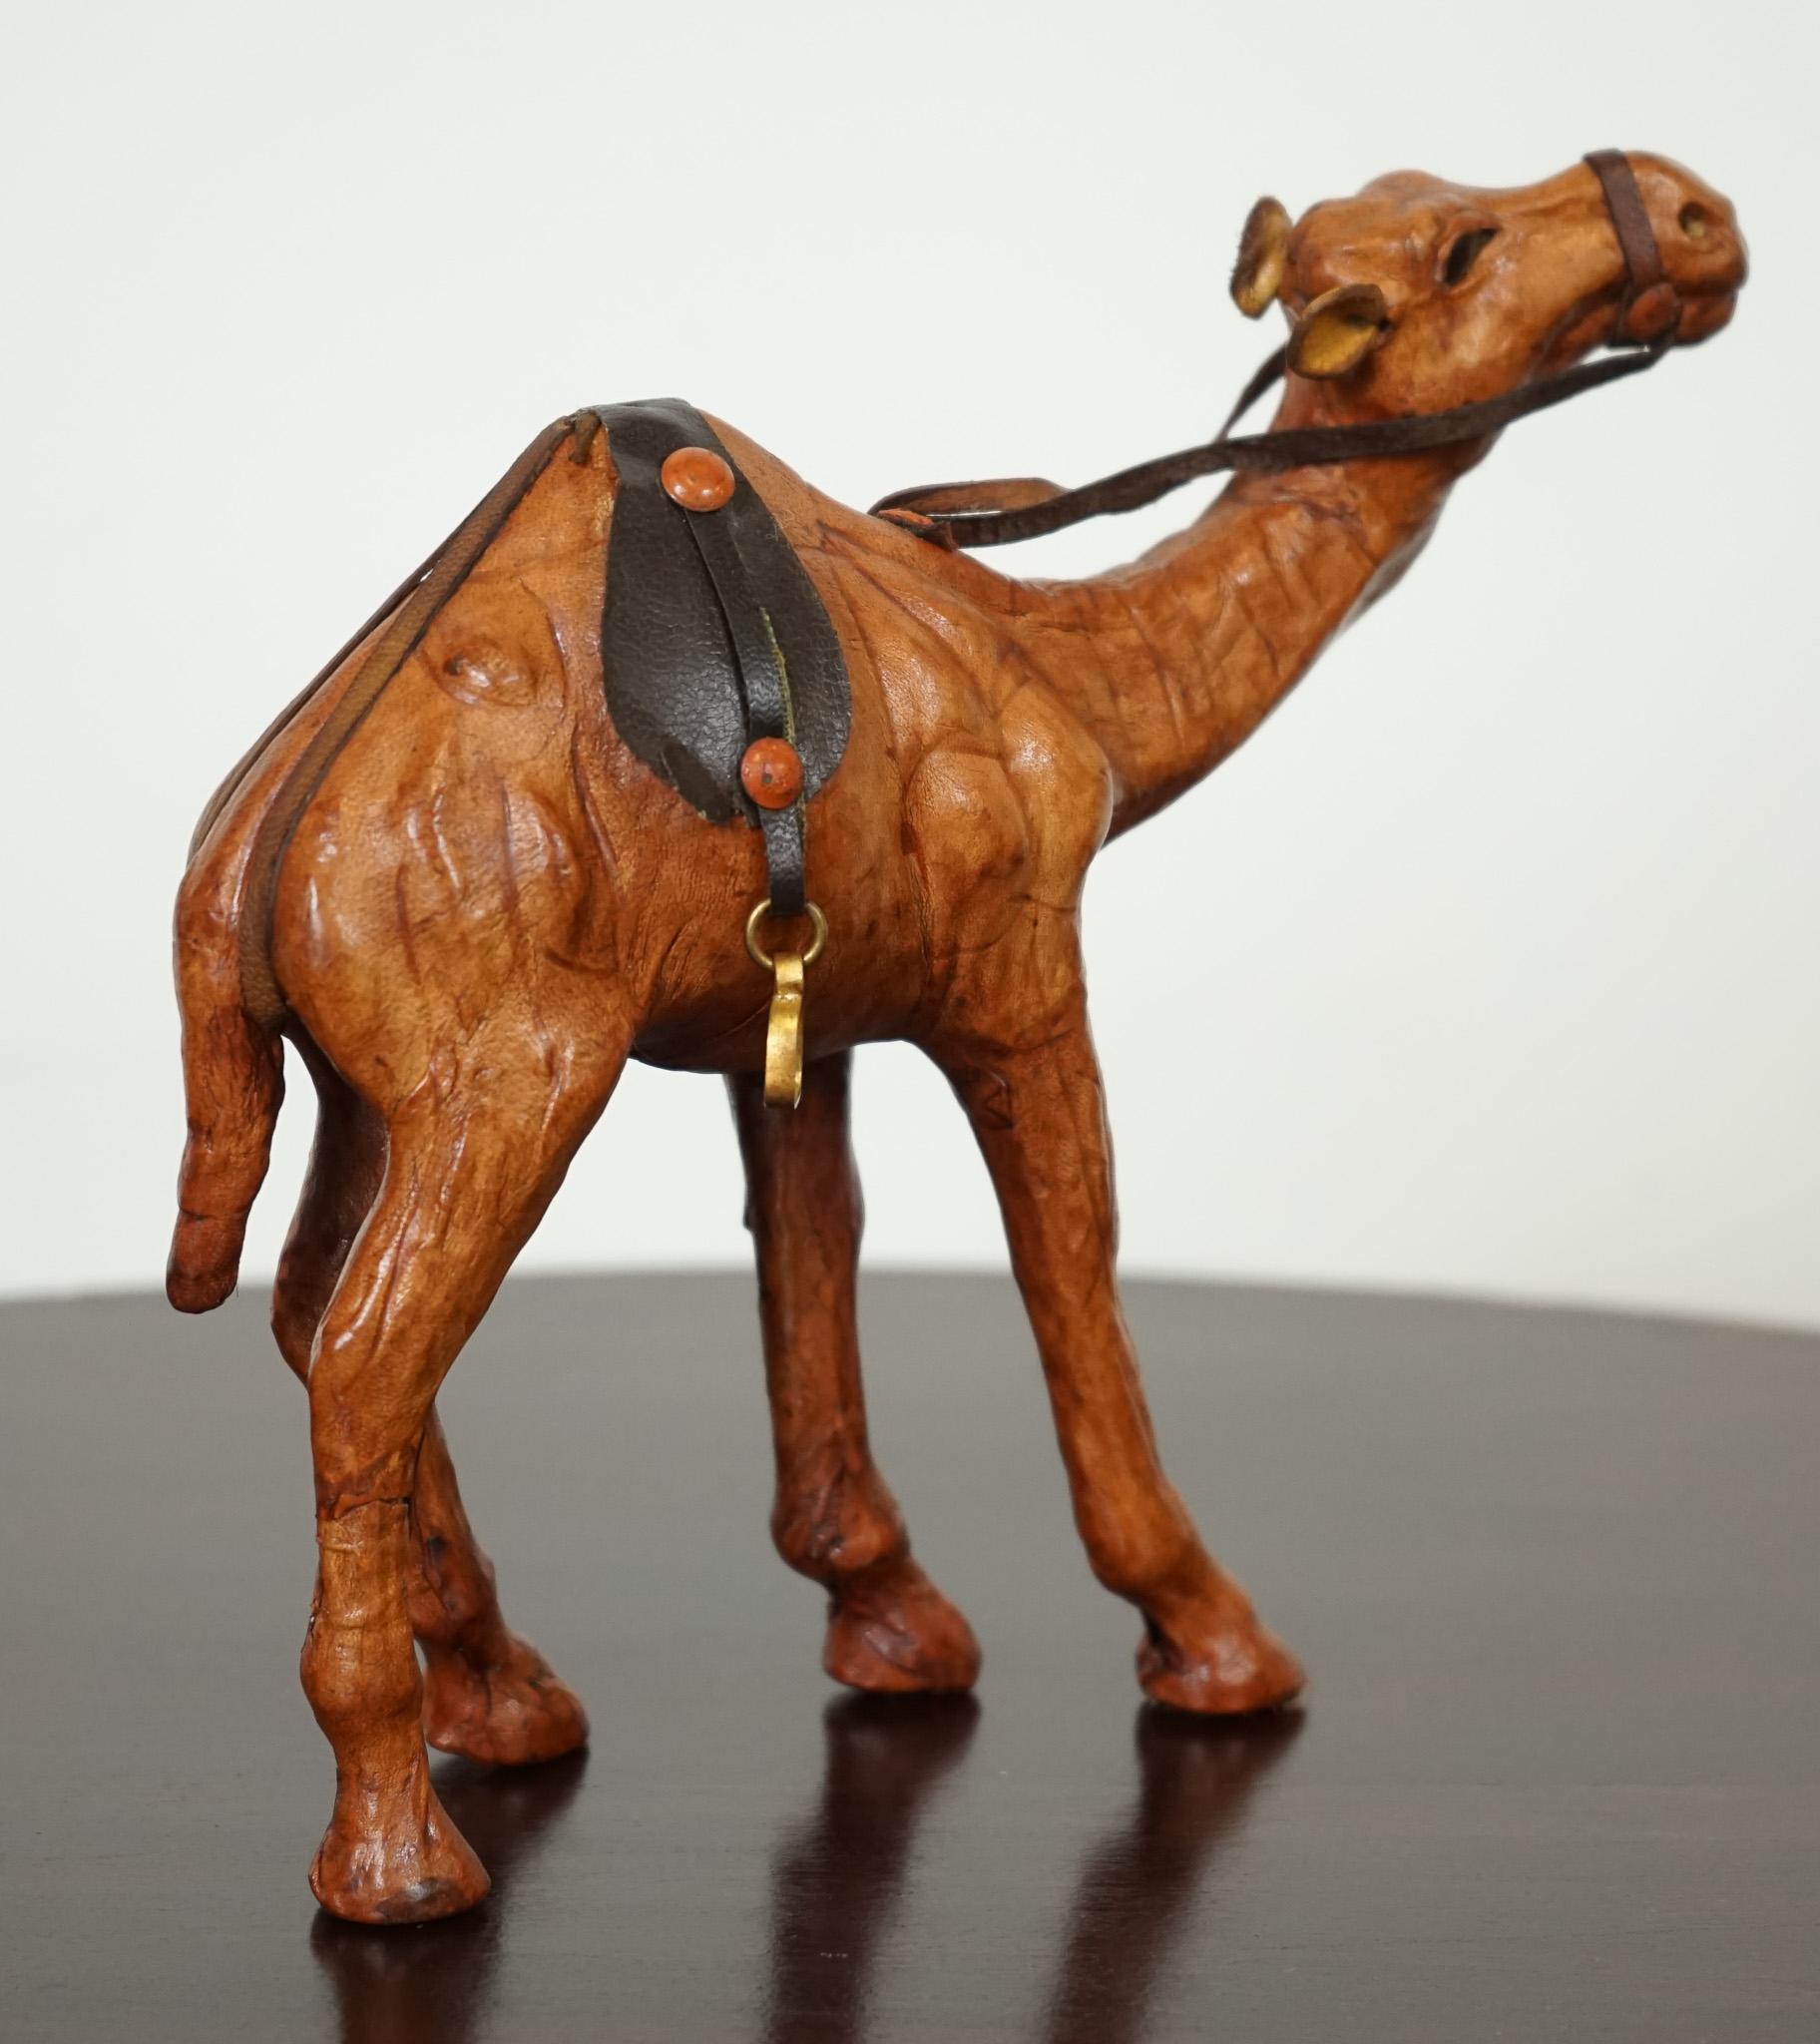 LIBERTY'S LONDON CAMEL SculPTURE WiTH LOVELY AGED LEATHER ON HAND CARved WOOD  (Handgefertigt) im Angebot